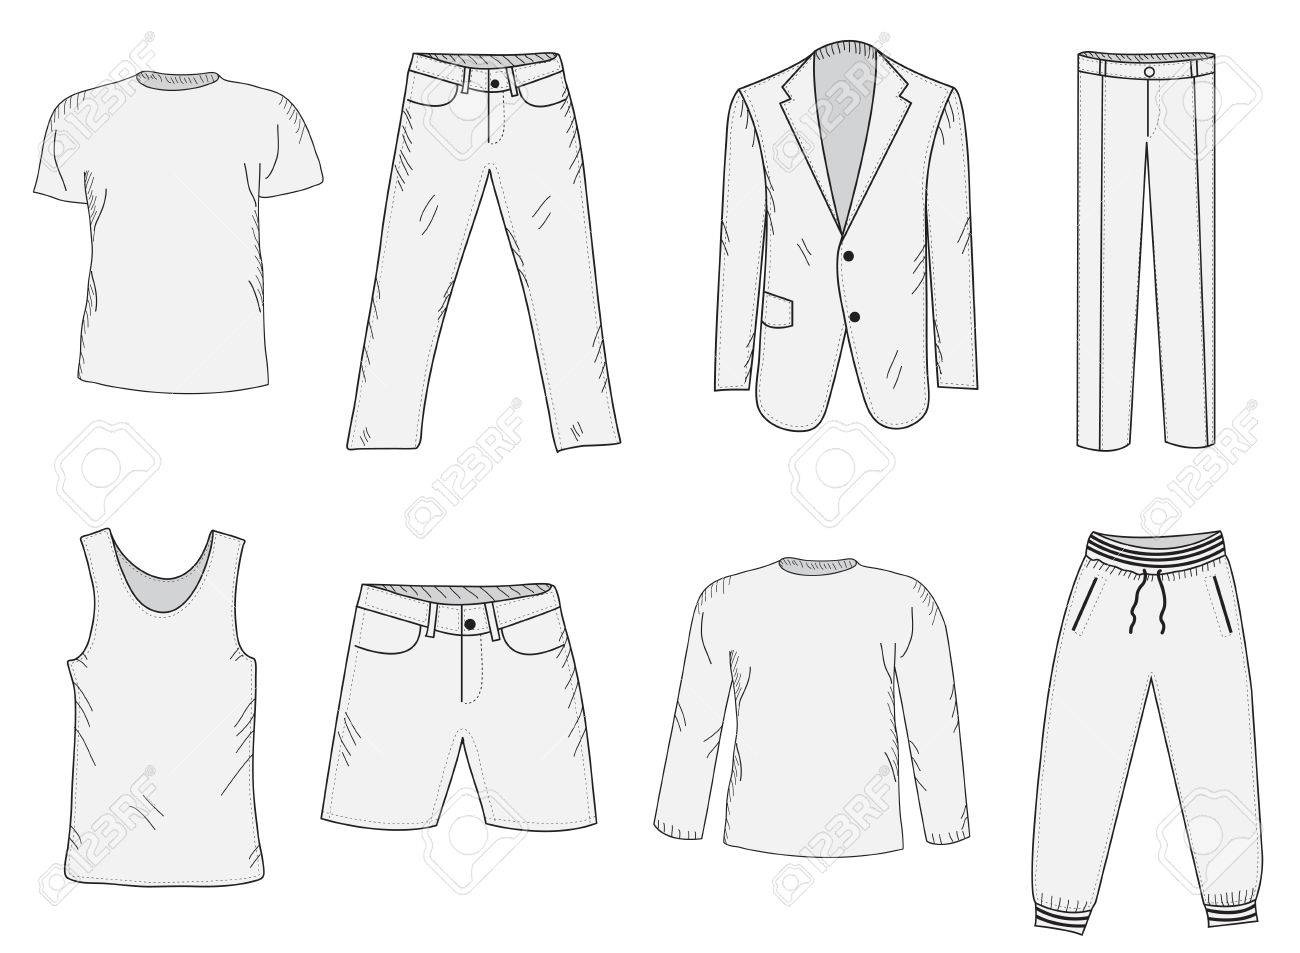 59603908 clothing set sketch men s clothes hand drawing style business suit jogging suit t shirt and shorts s